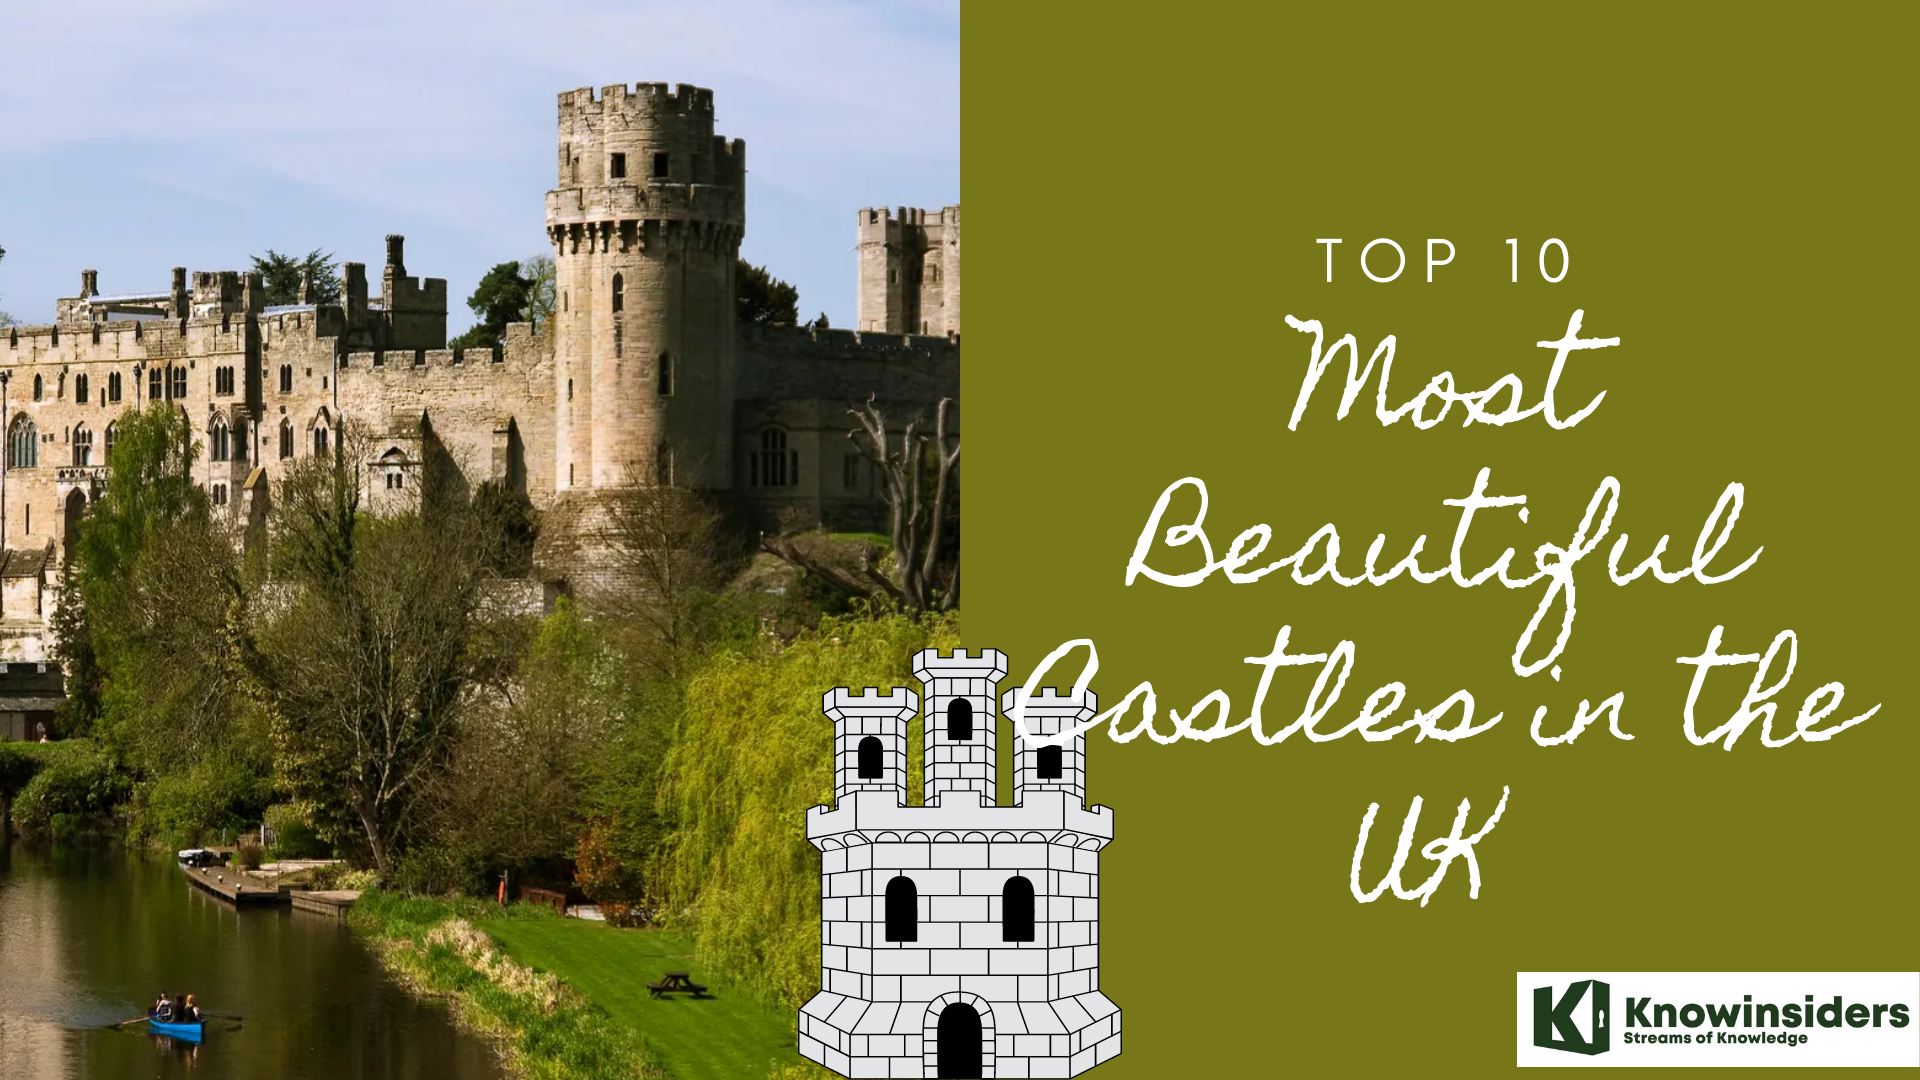 Top 10 most beautiful castles in the UK 